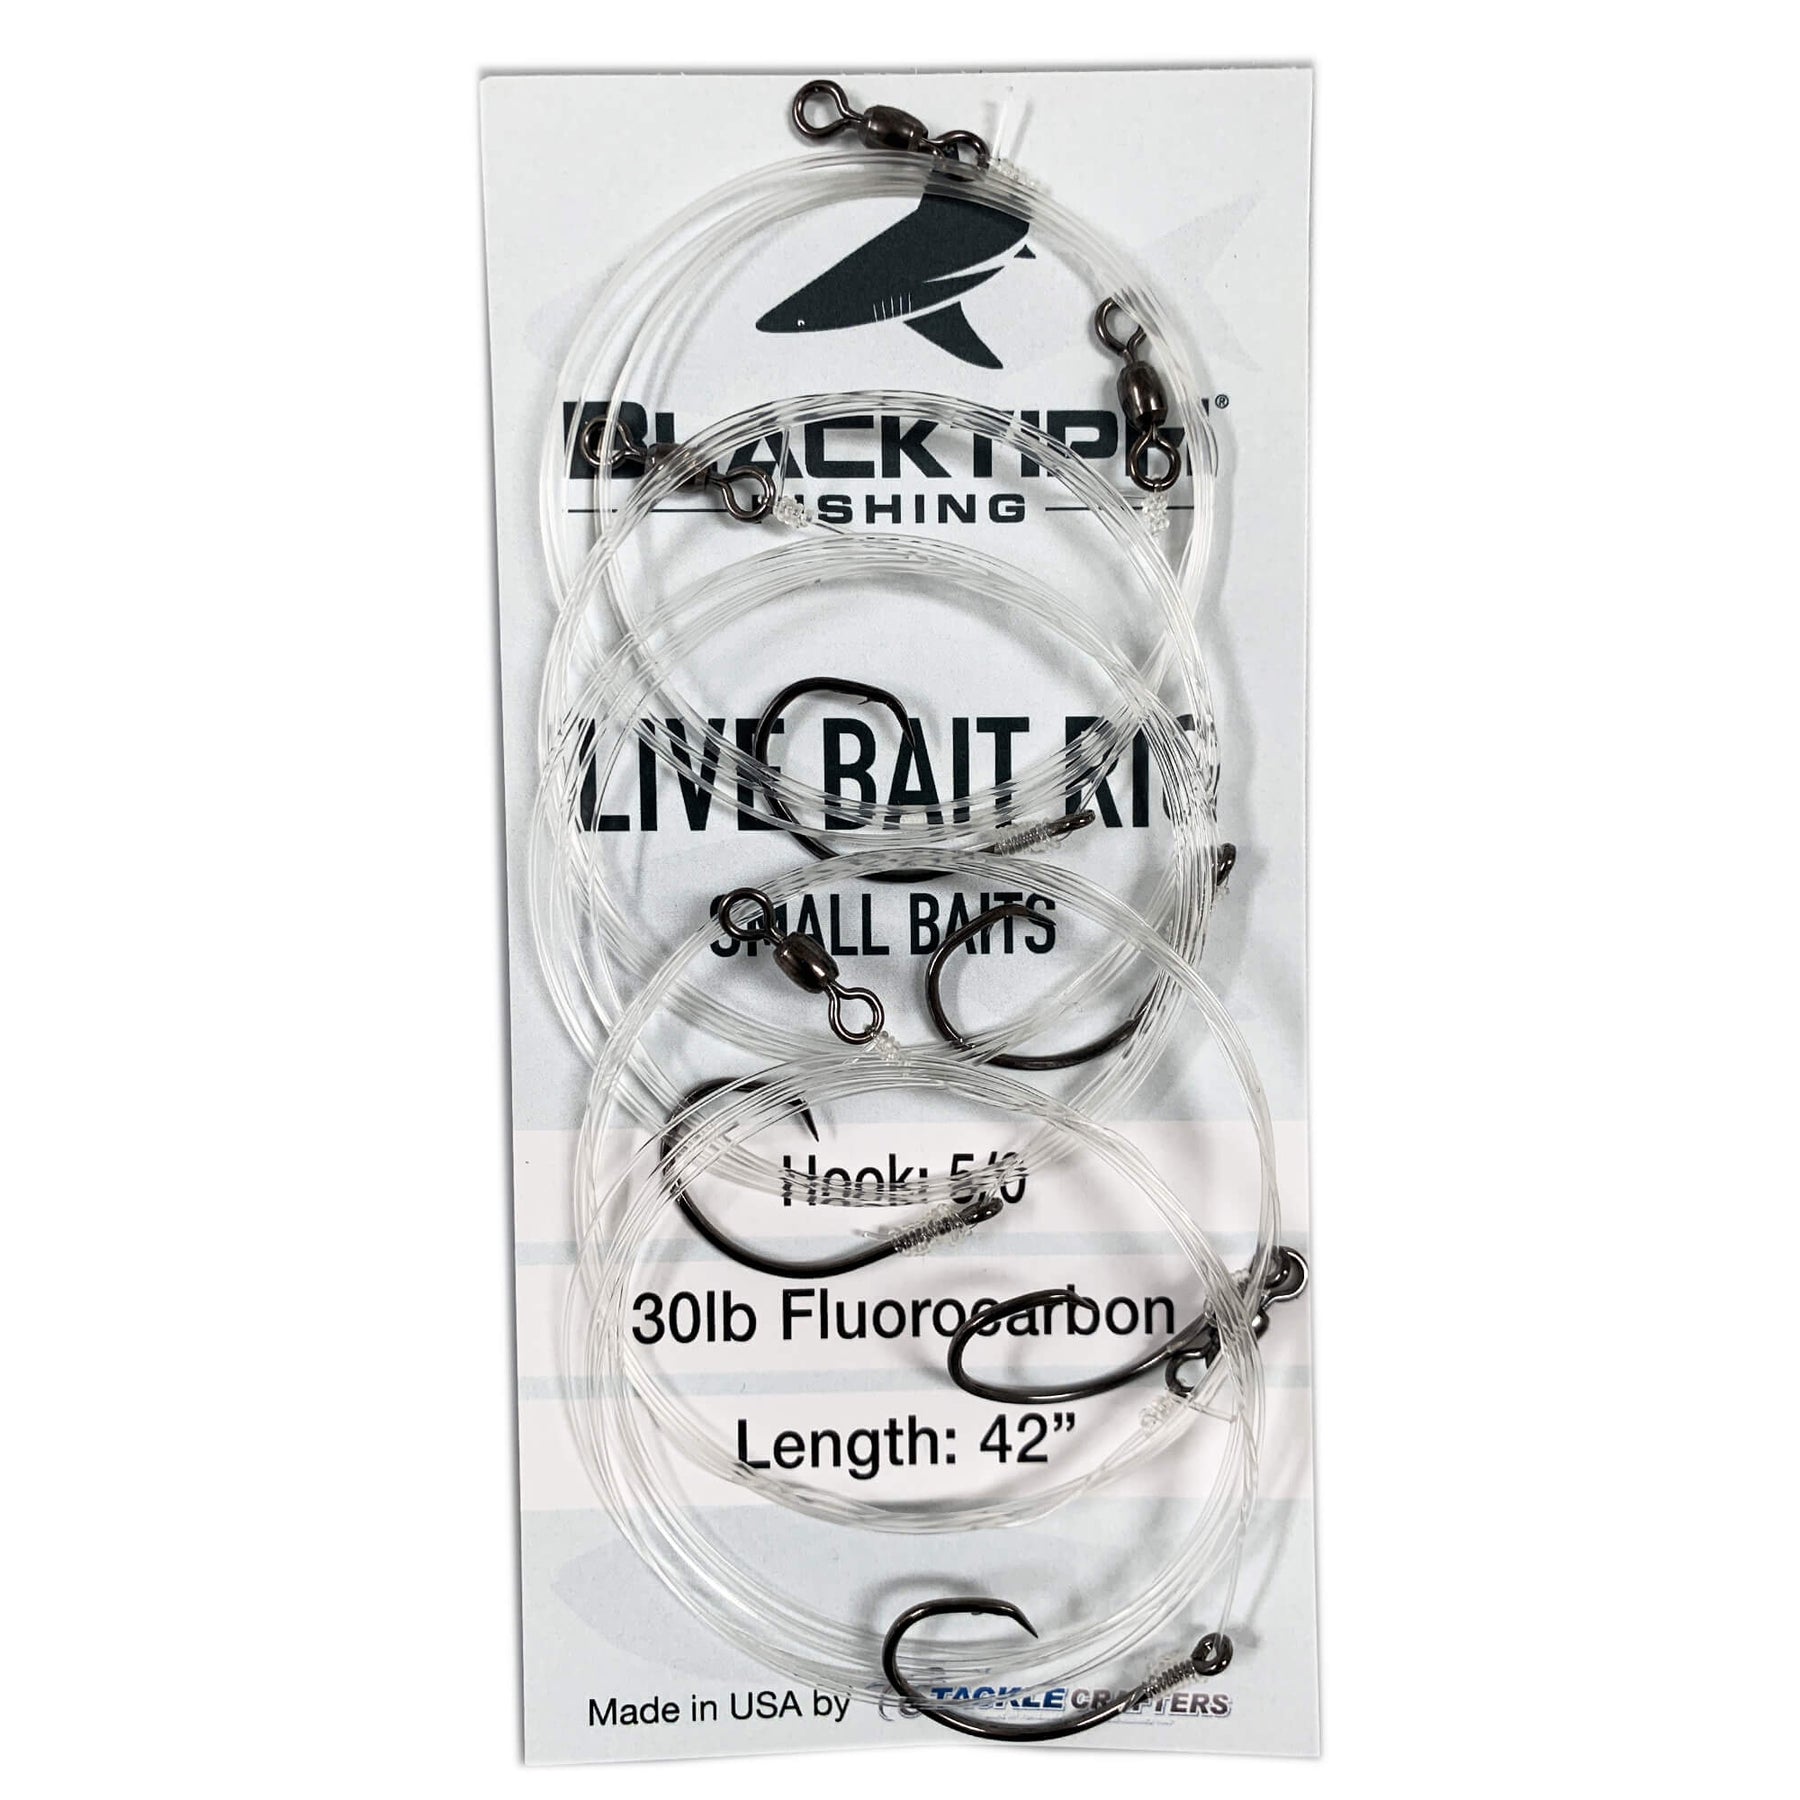 BlacktipH Live Bait Rigs with 5/0 Black Nickel Circle Hook and Premium